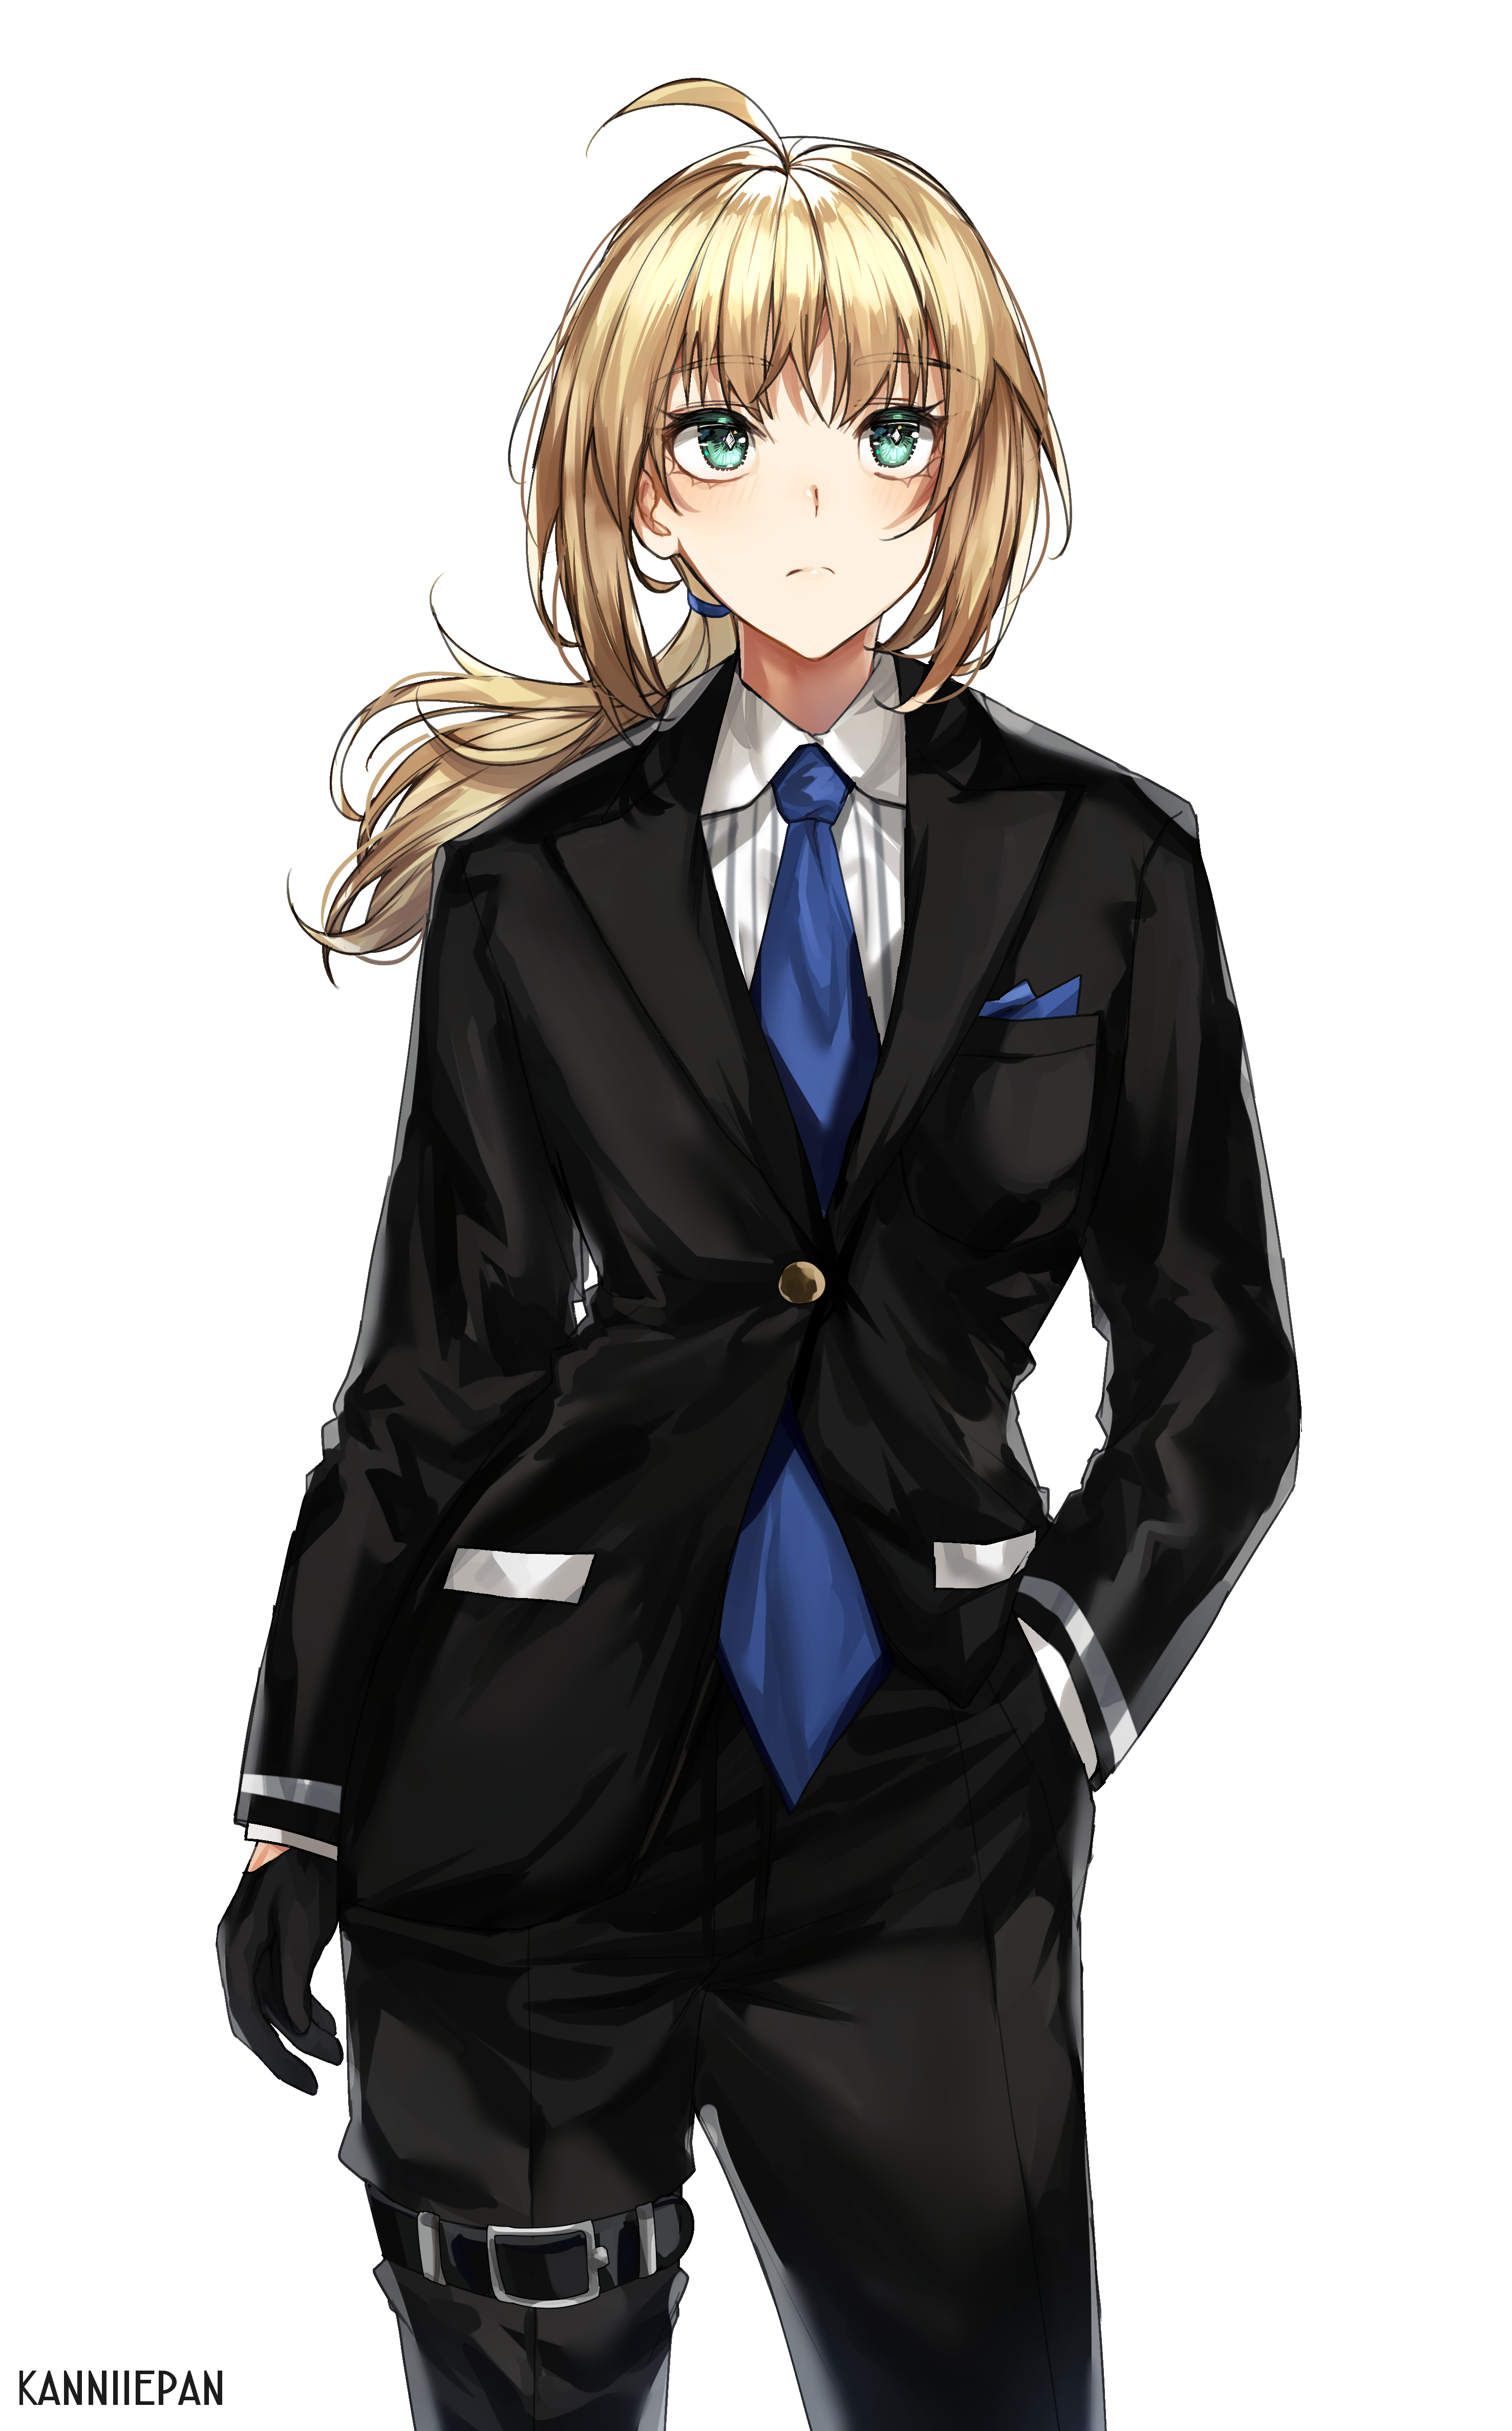 Anime 2953x4748 Fate series Fate/Stay Night Fate/Zero anime girls long hair black suit ponytail ahoge small boobs Saber green eyes black gloves portrait display fan art simple background 2D anime blonde suits Artoria Pendragon